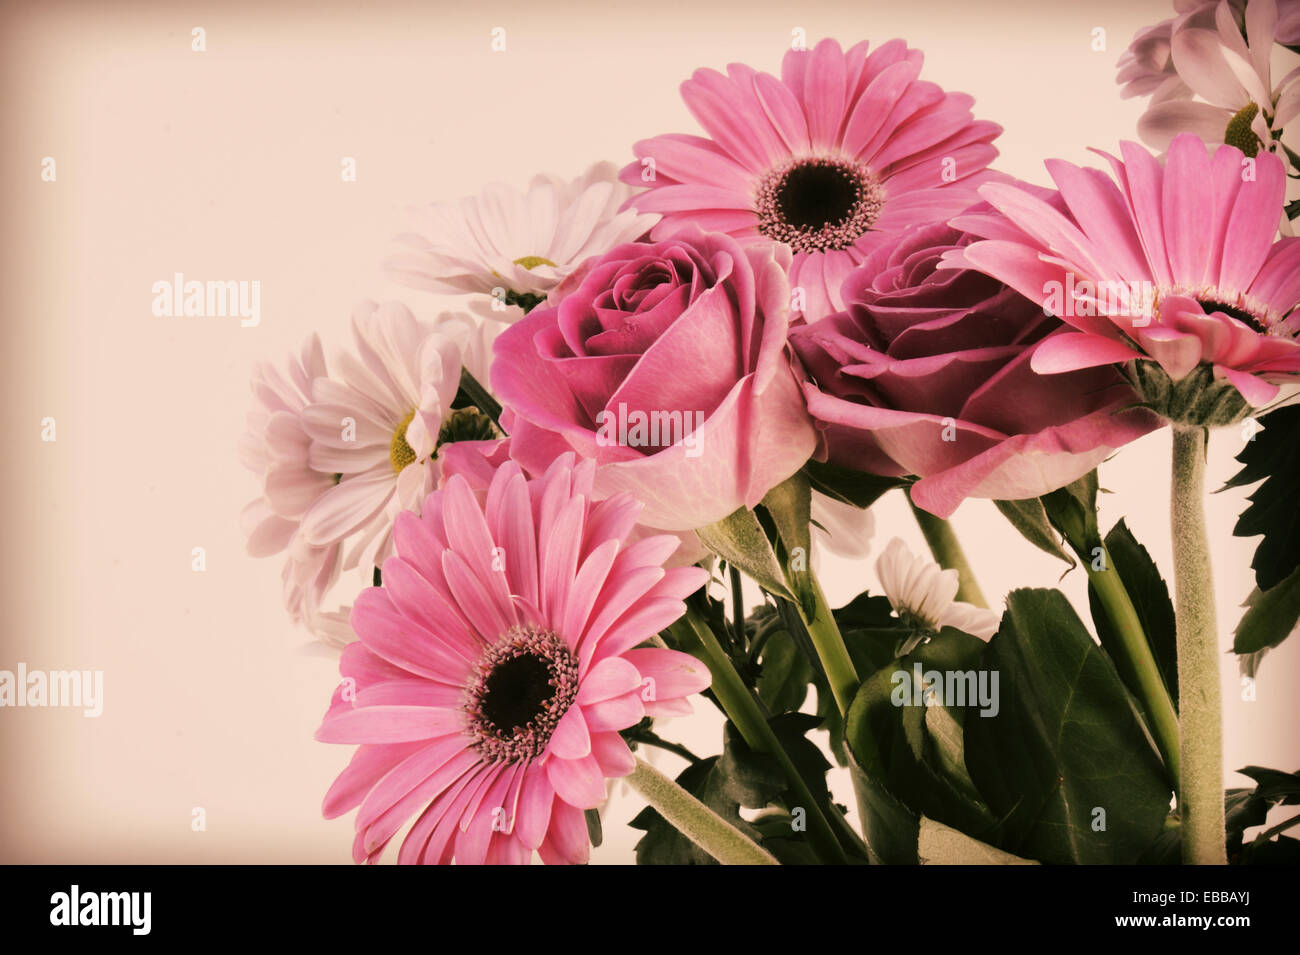 Flower background with a vintage effect Stock Photo